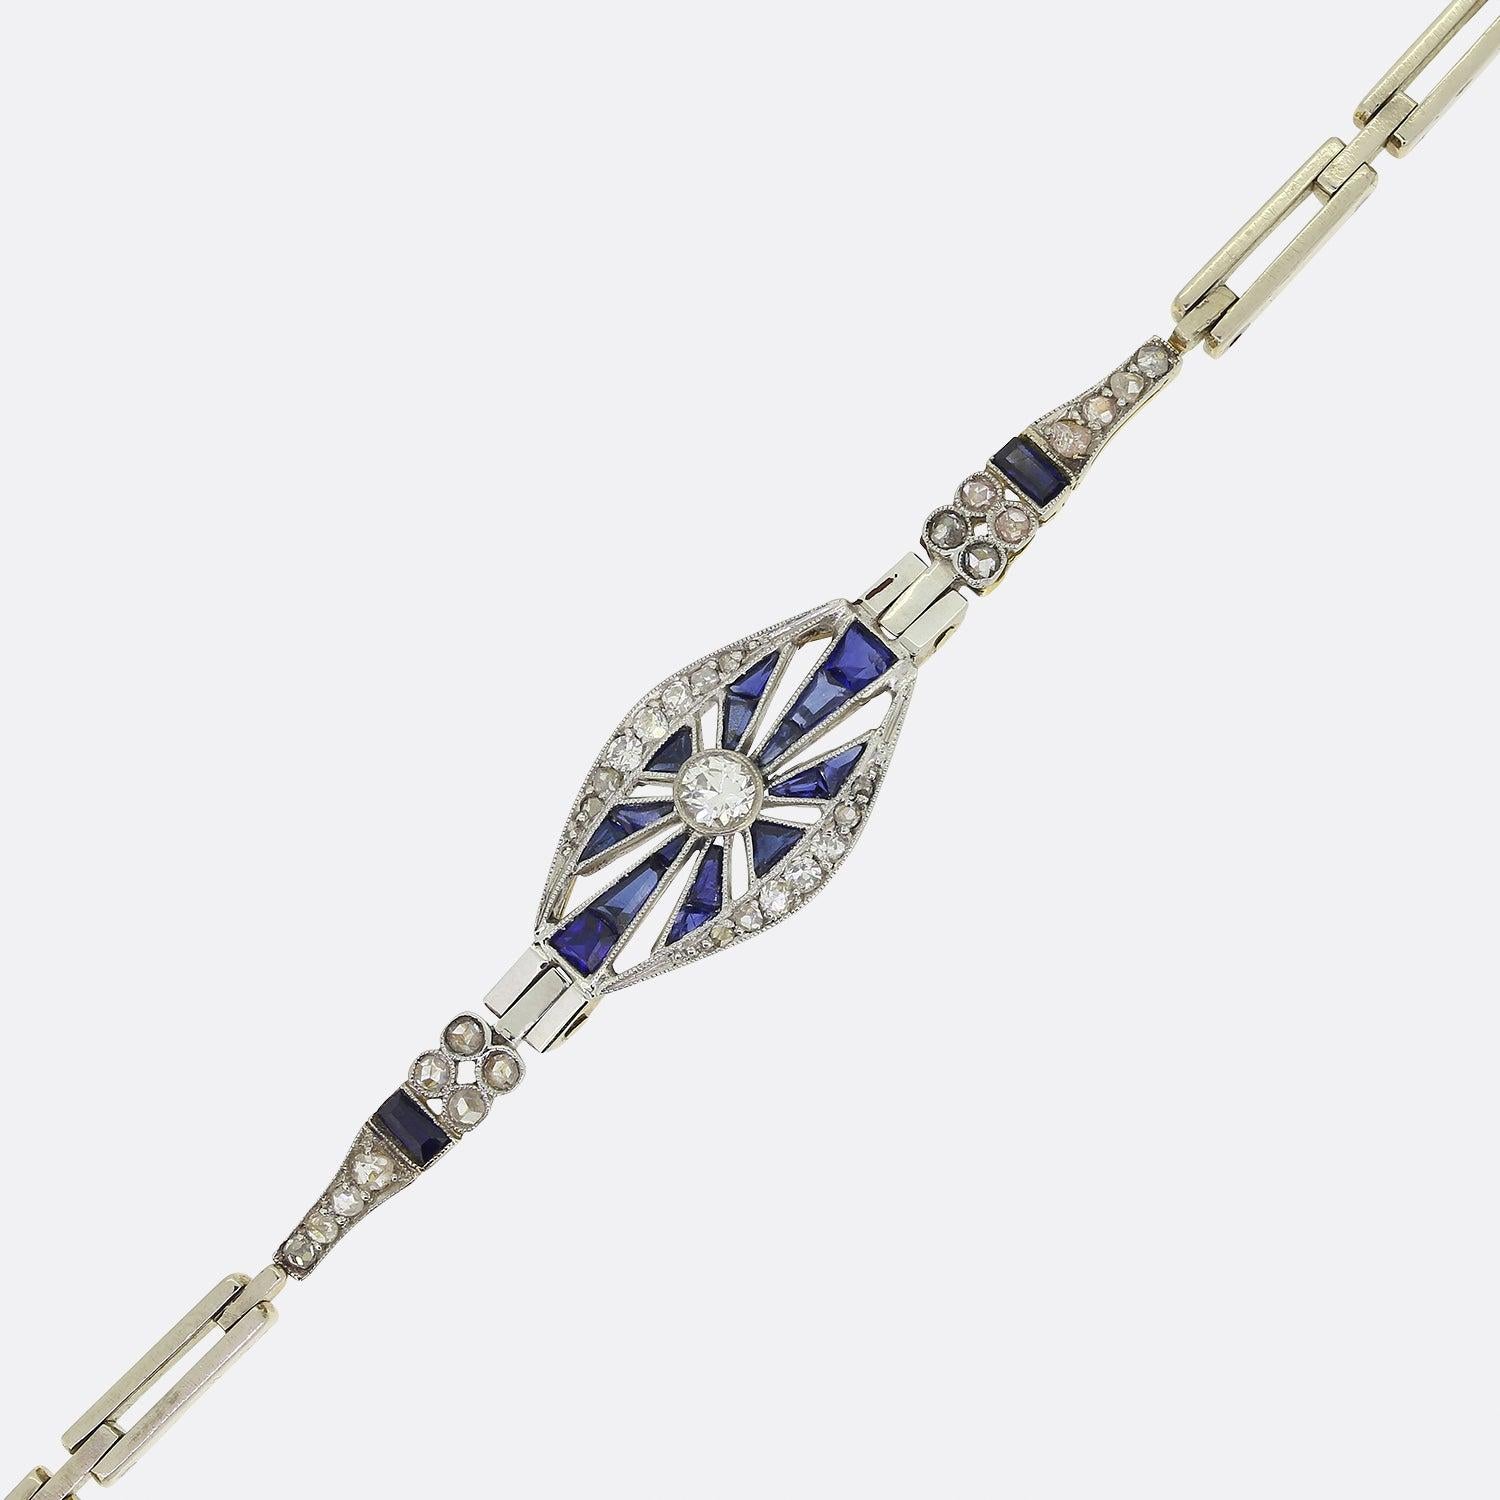 This is a truly wonderful sapphire and diamond bracelet from the Art Deco era. The bracelet features a central transitional cut diamond surrounded by rich blue calibrated sapphires and old cut diamonds both above and below. The back of the bracelet